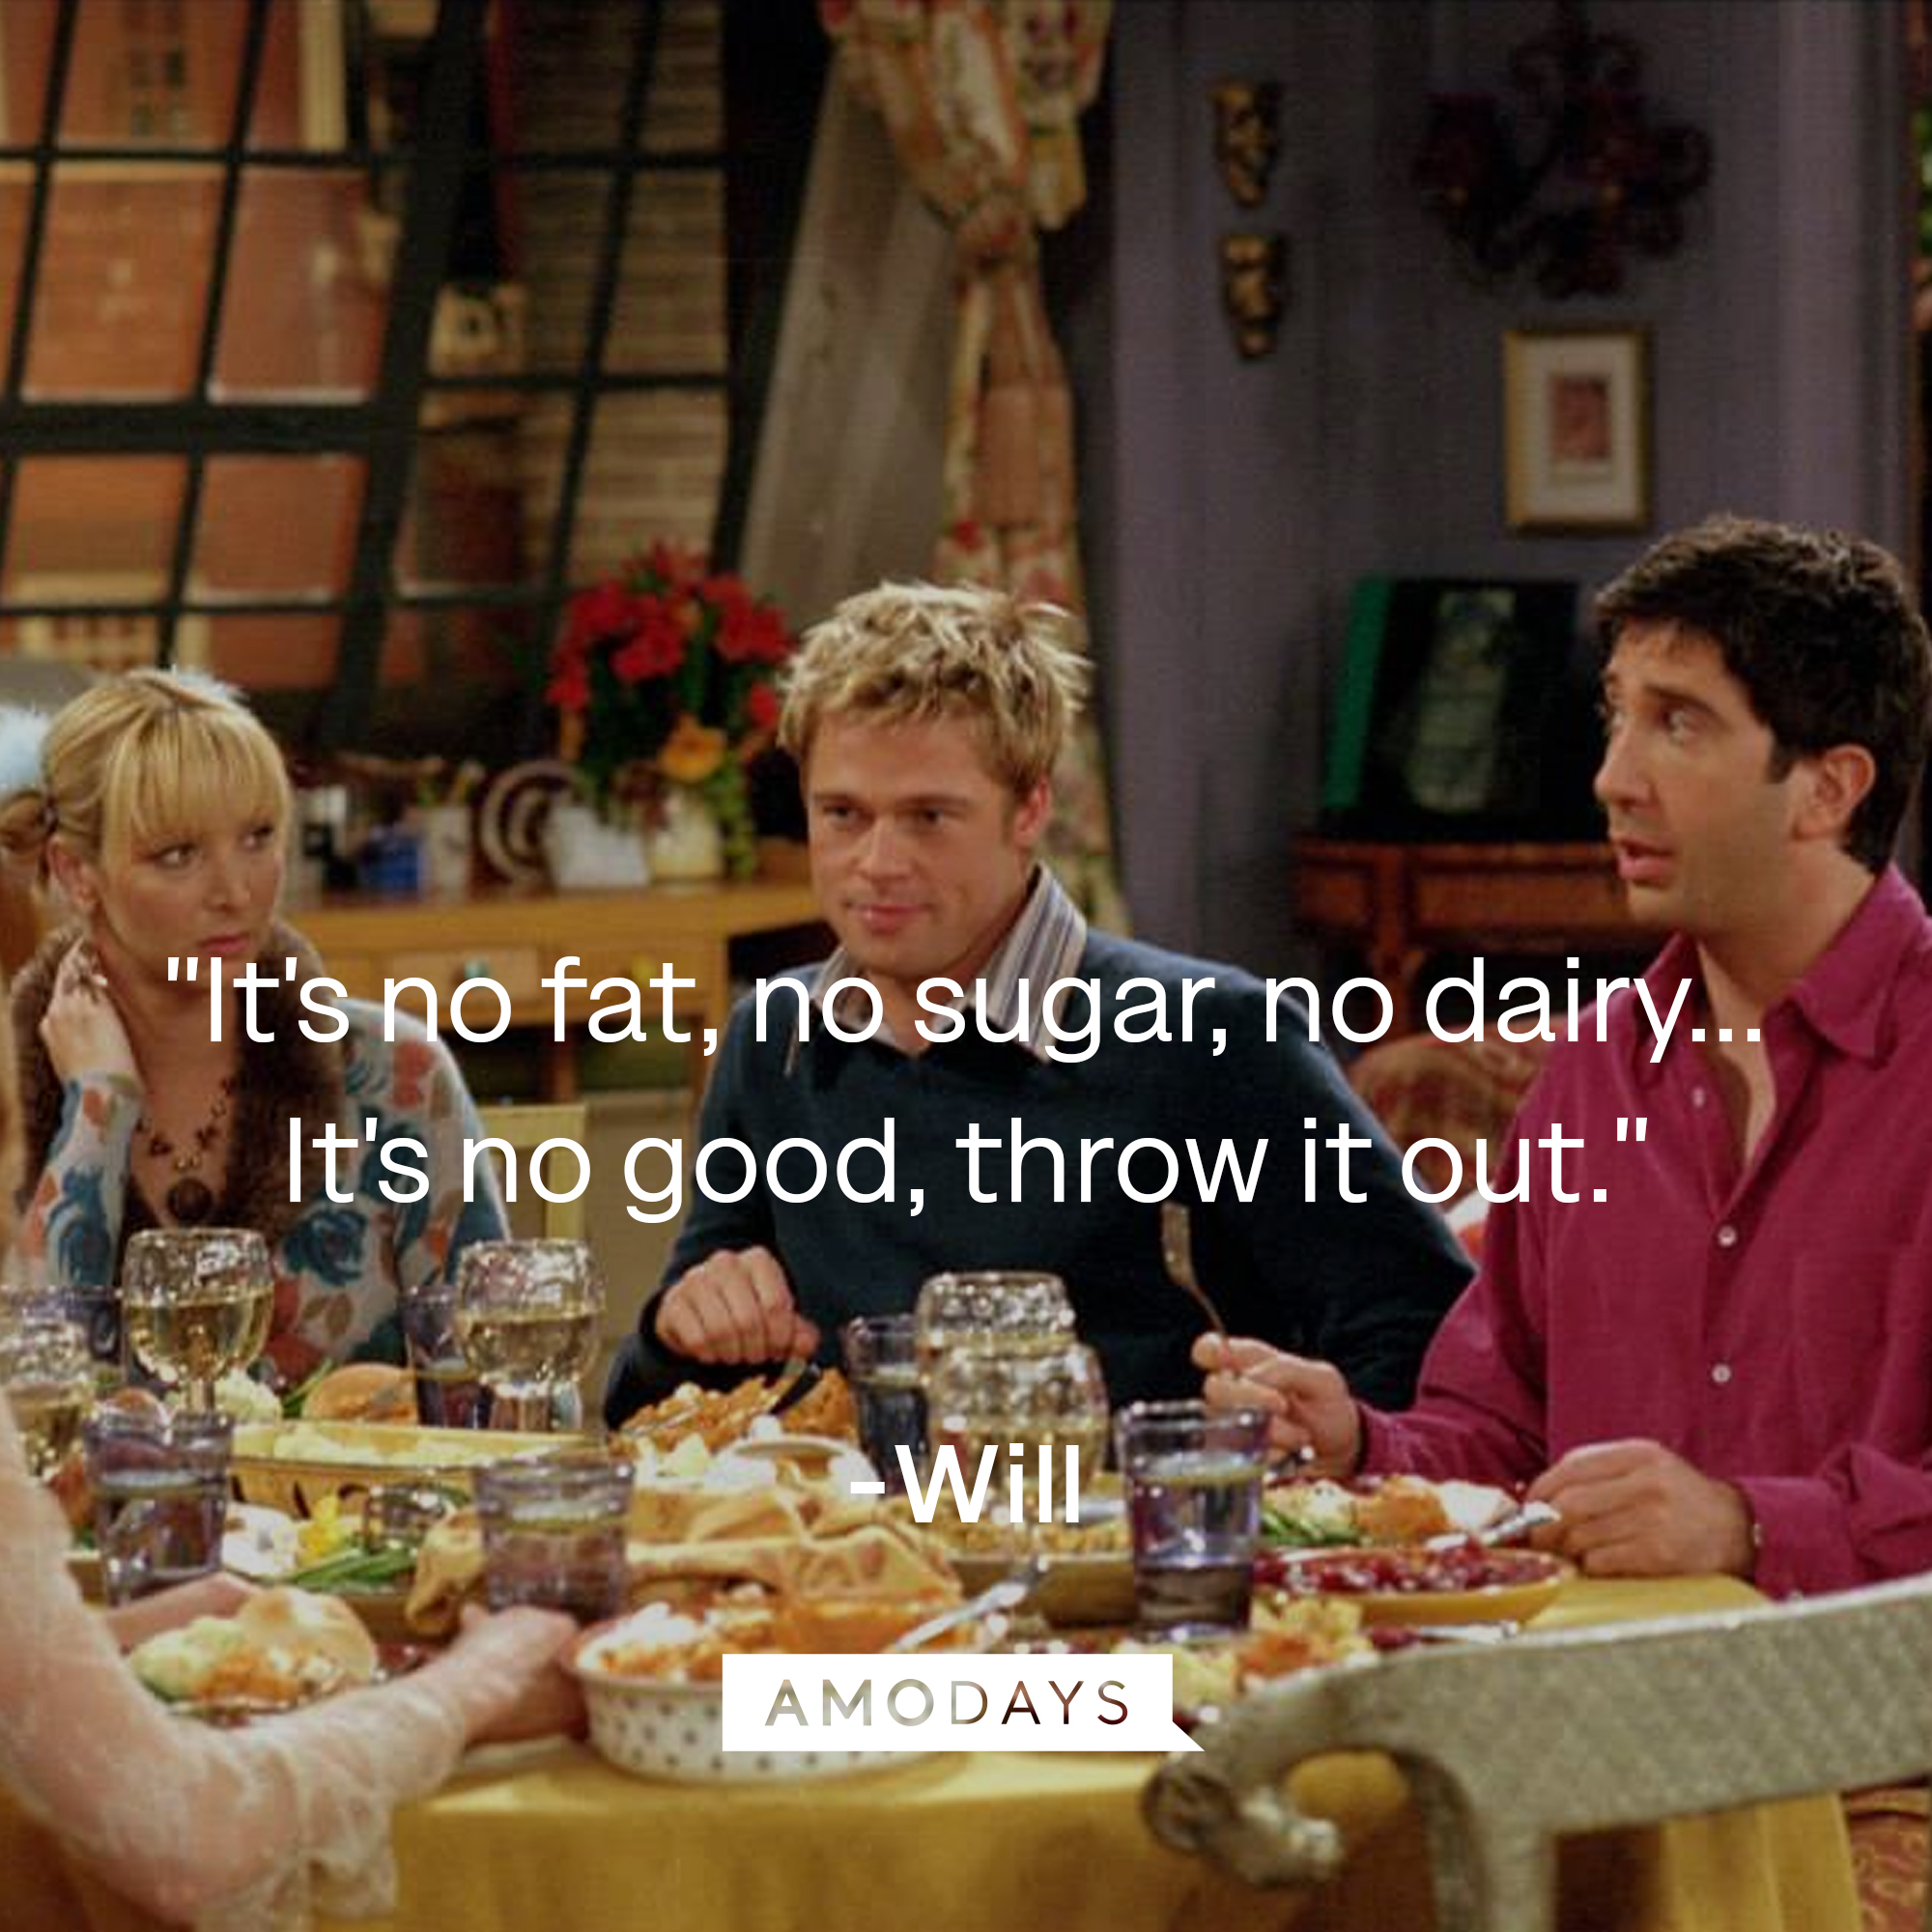 Will’s quote: "It's no fat, no sugar, no dairy... It's no good, throw it out." | Source: Facebook/friends.tv